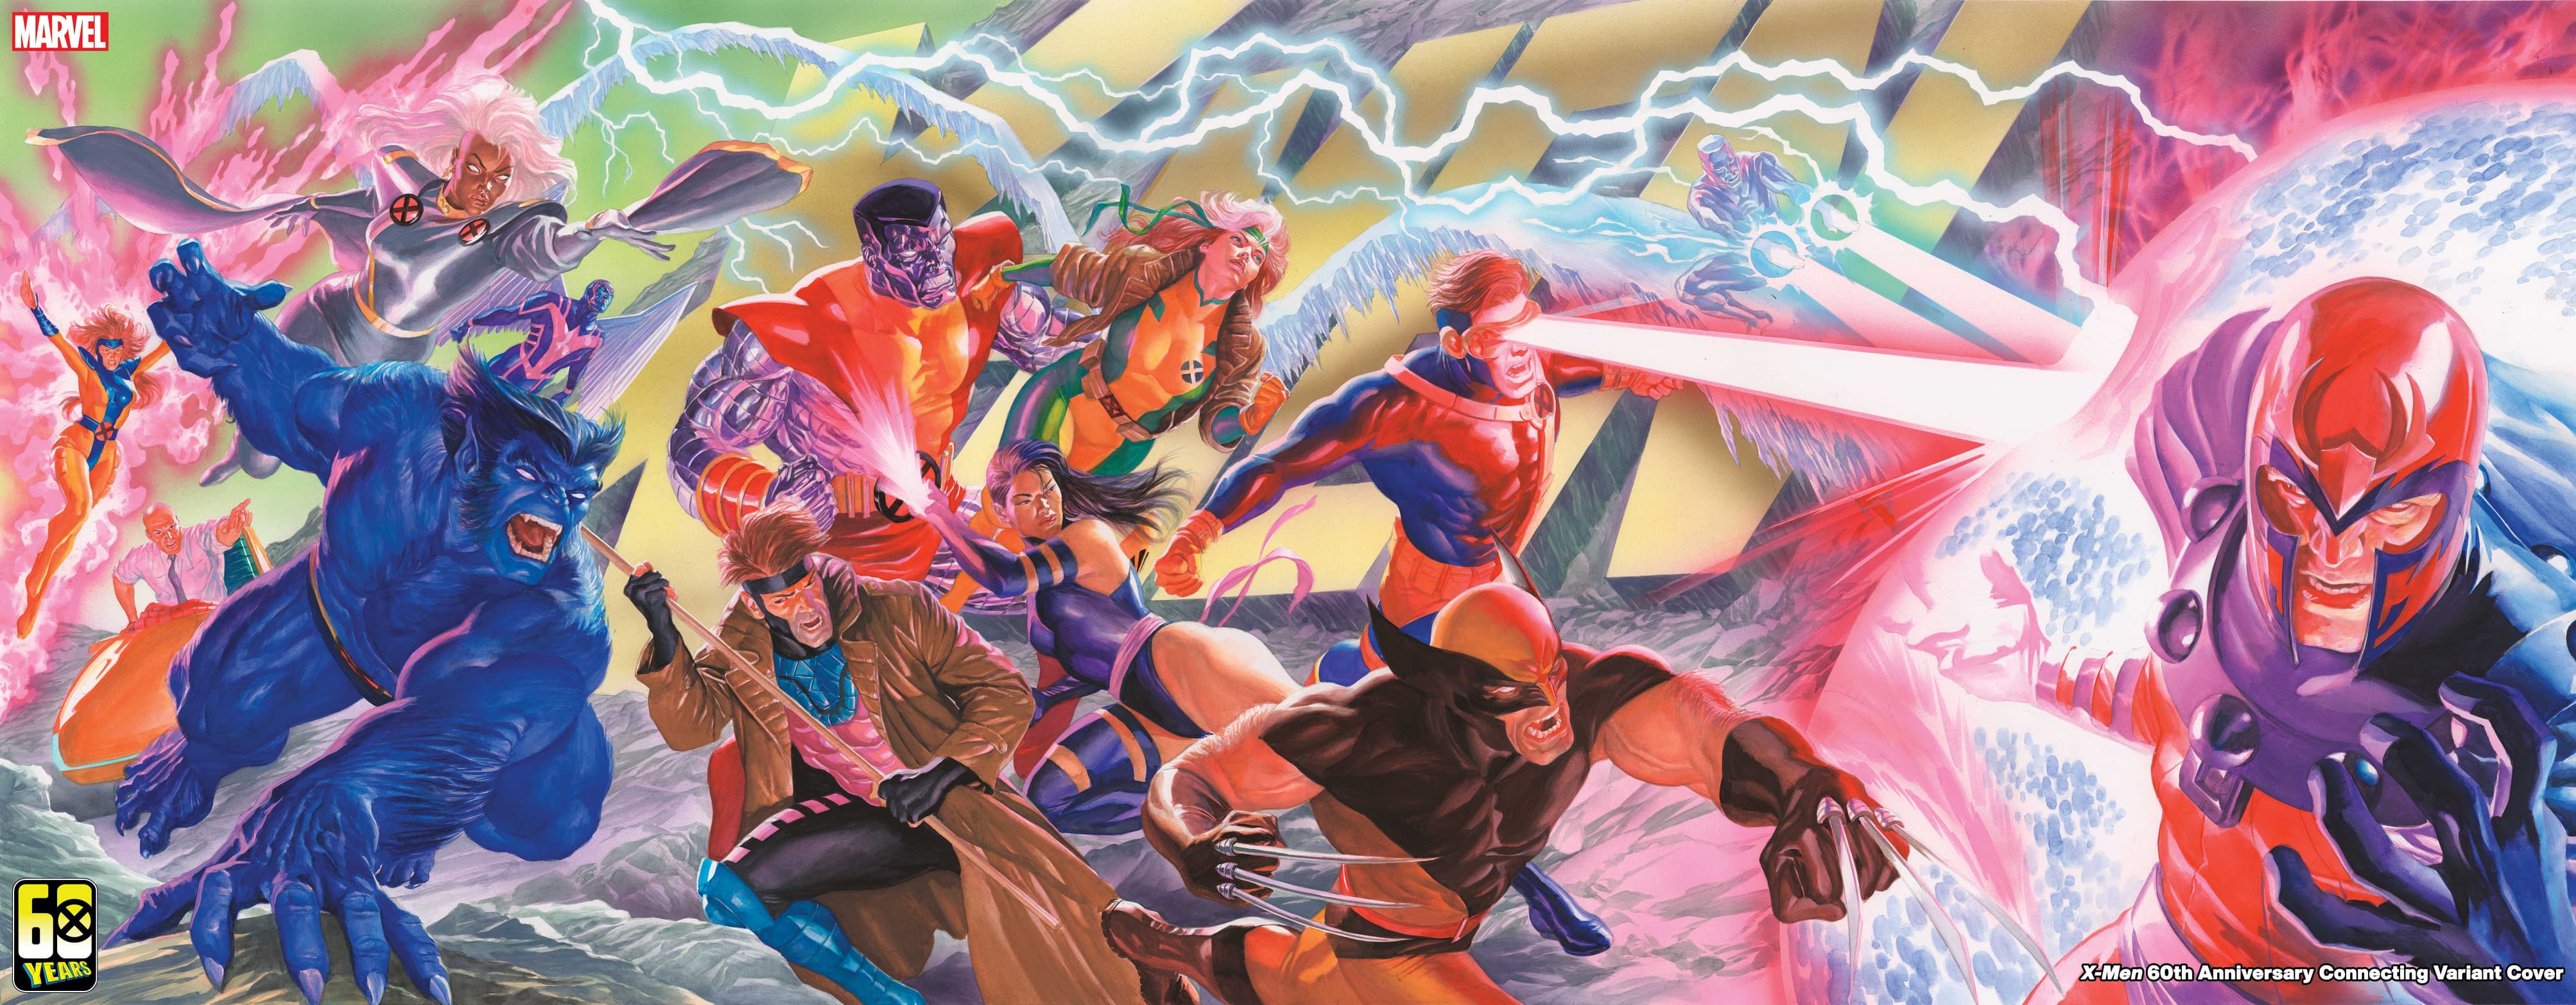 Alex Ross connecting covers for X-Men 60th Anniversary